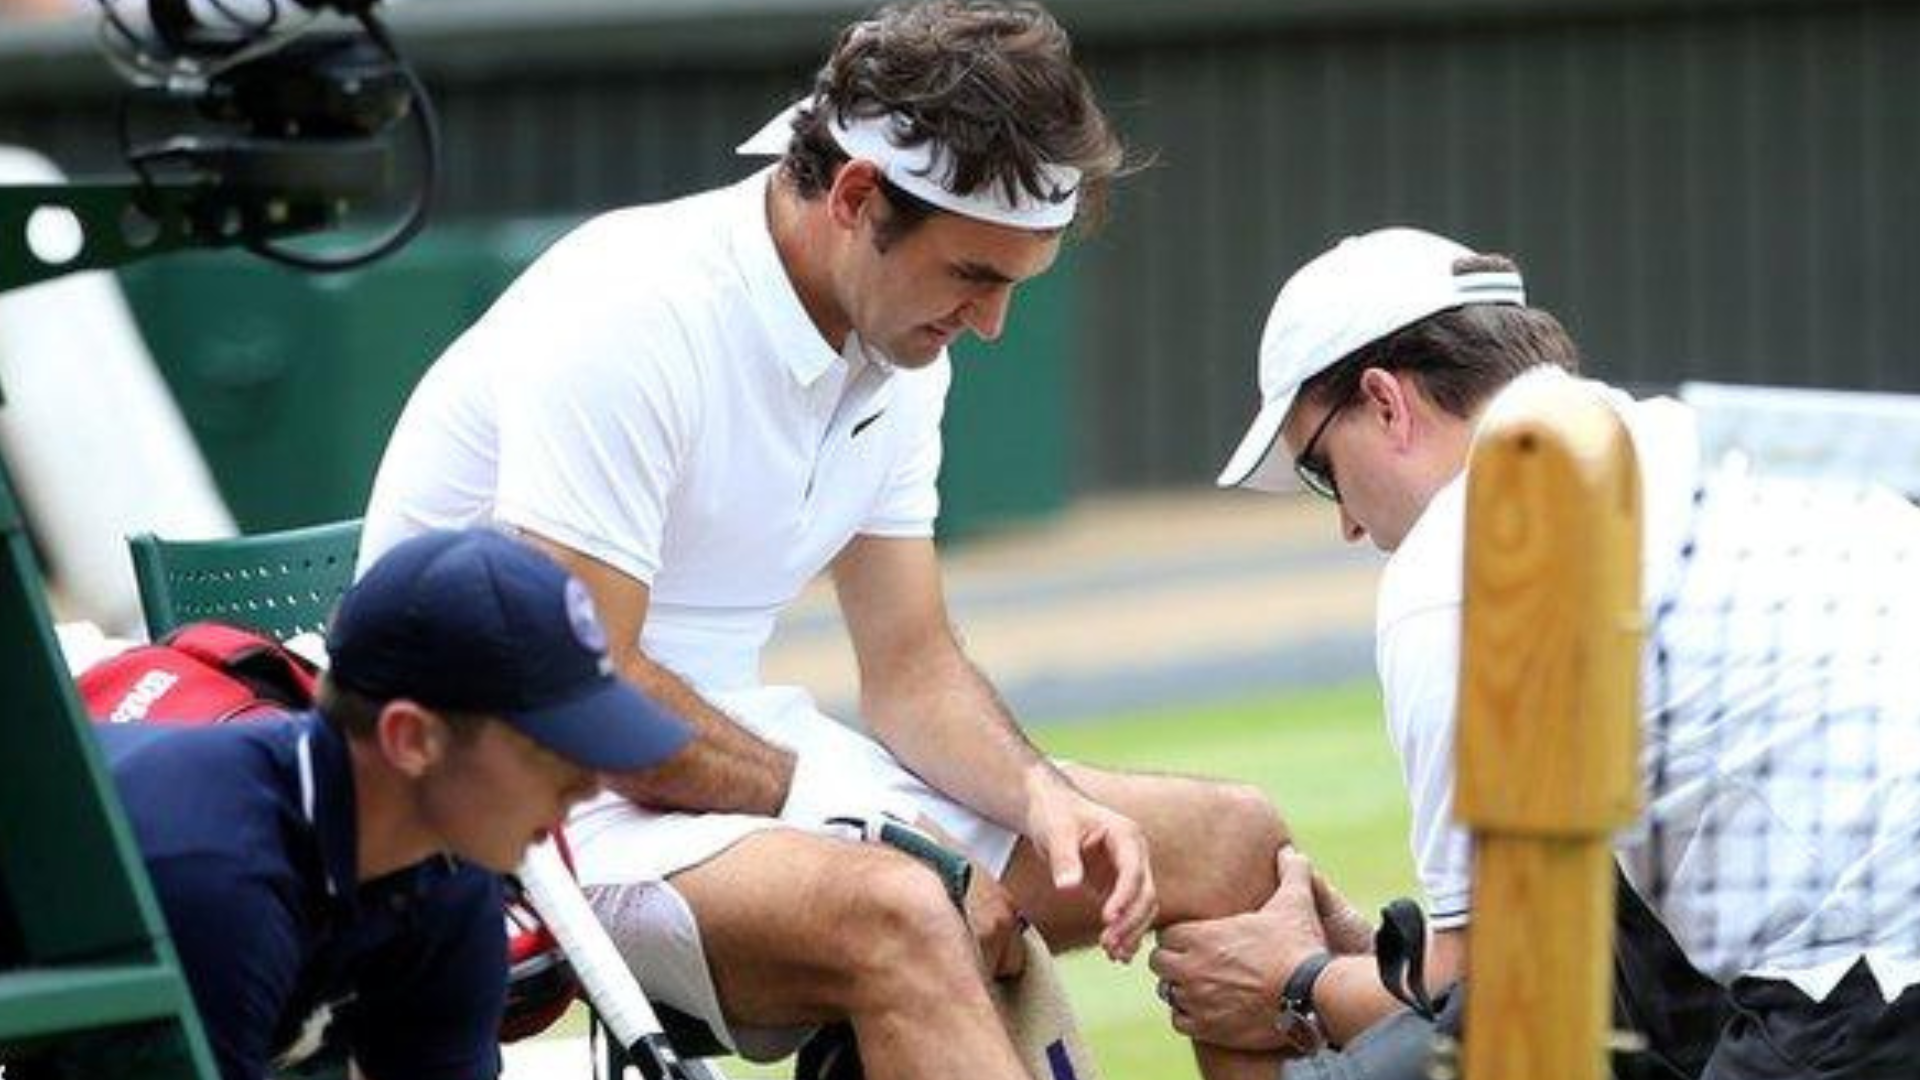 Roger sitting down with someone holding his knee